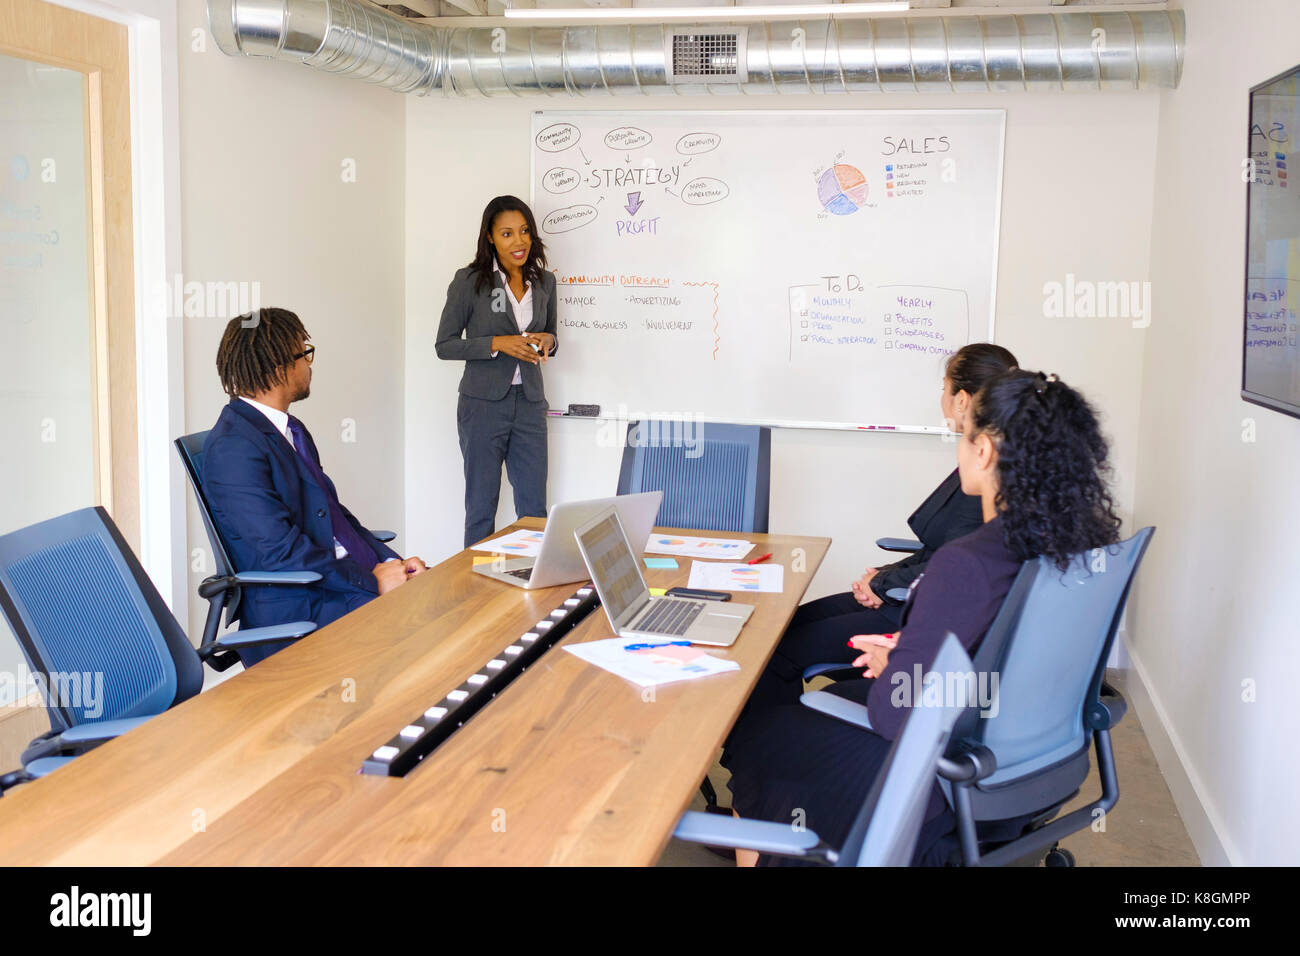 Businessman and businesswomen in meeting room, businesswoman, standing at front, explaining business strategy Stock Photo